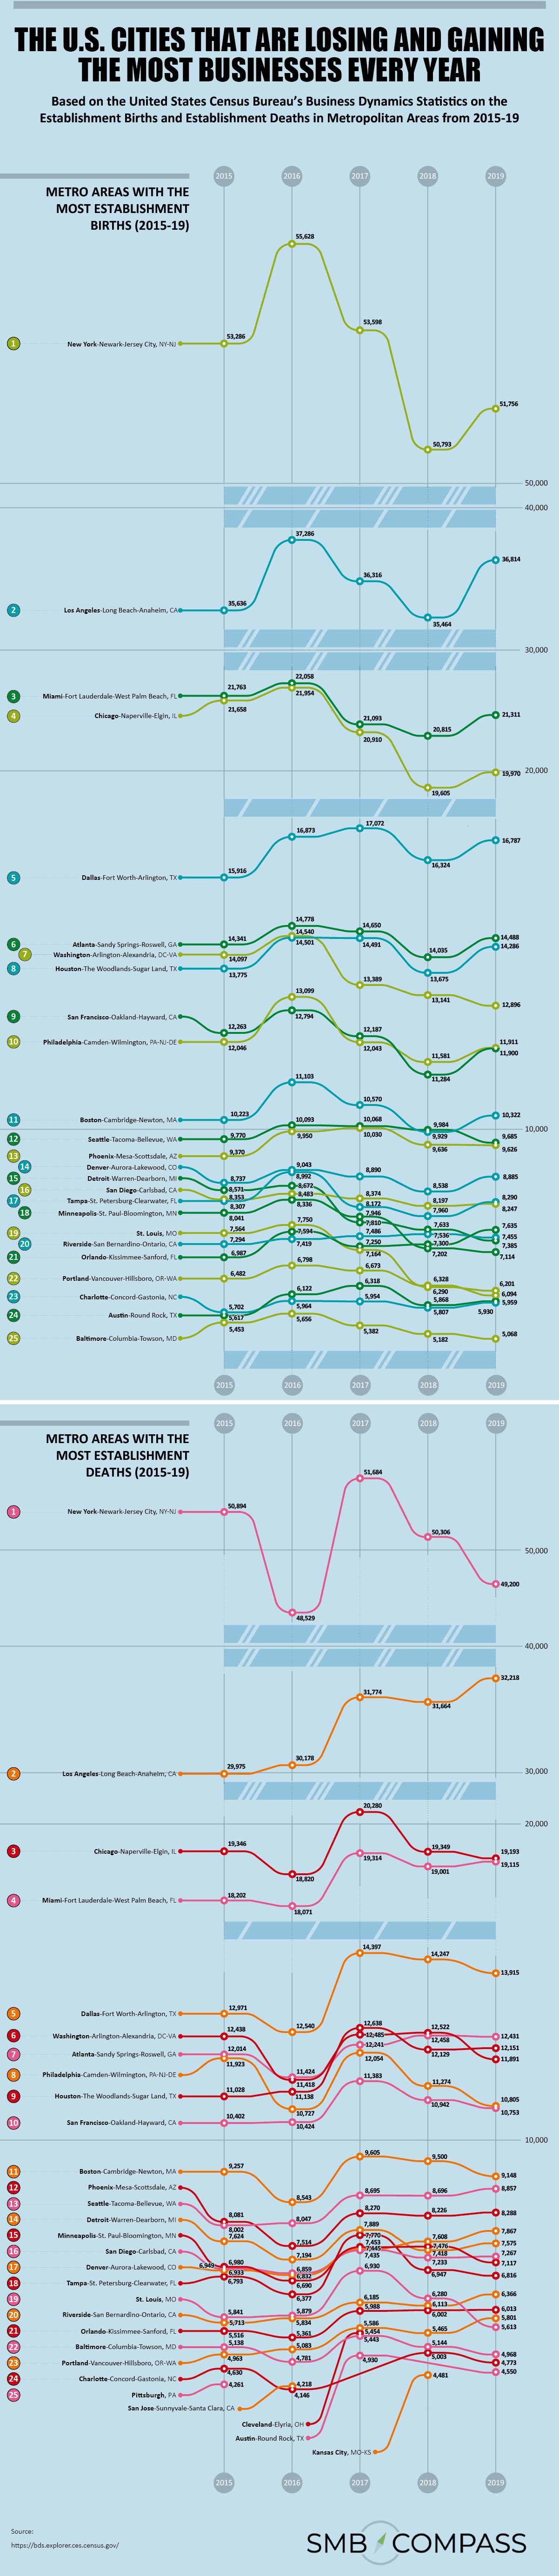 U.S. Cities That Have Gained and Lost the Most Businesses #infographic